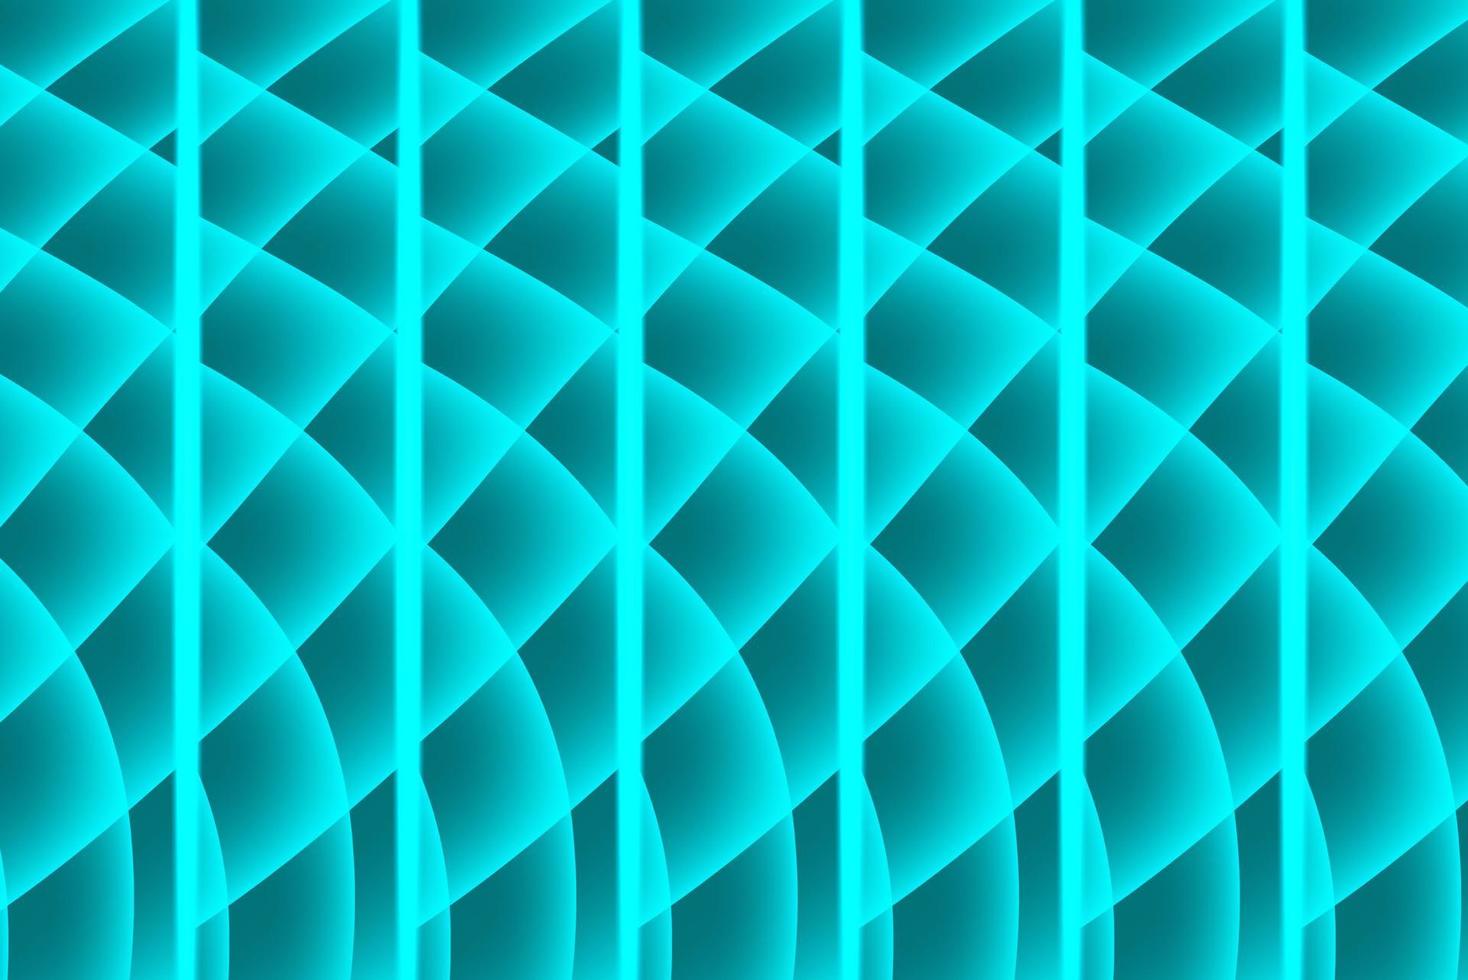 Teal or turquoise green abstract pattern background texture vector